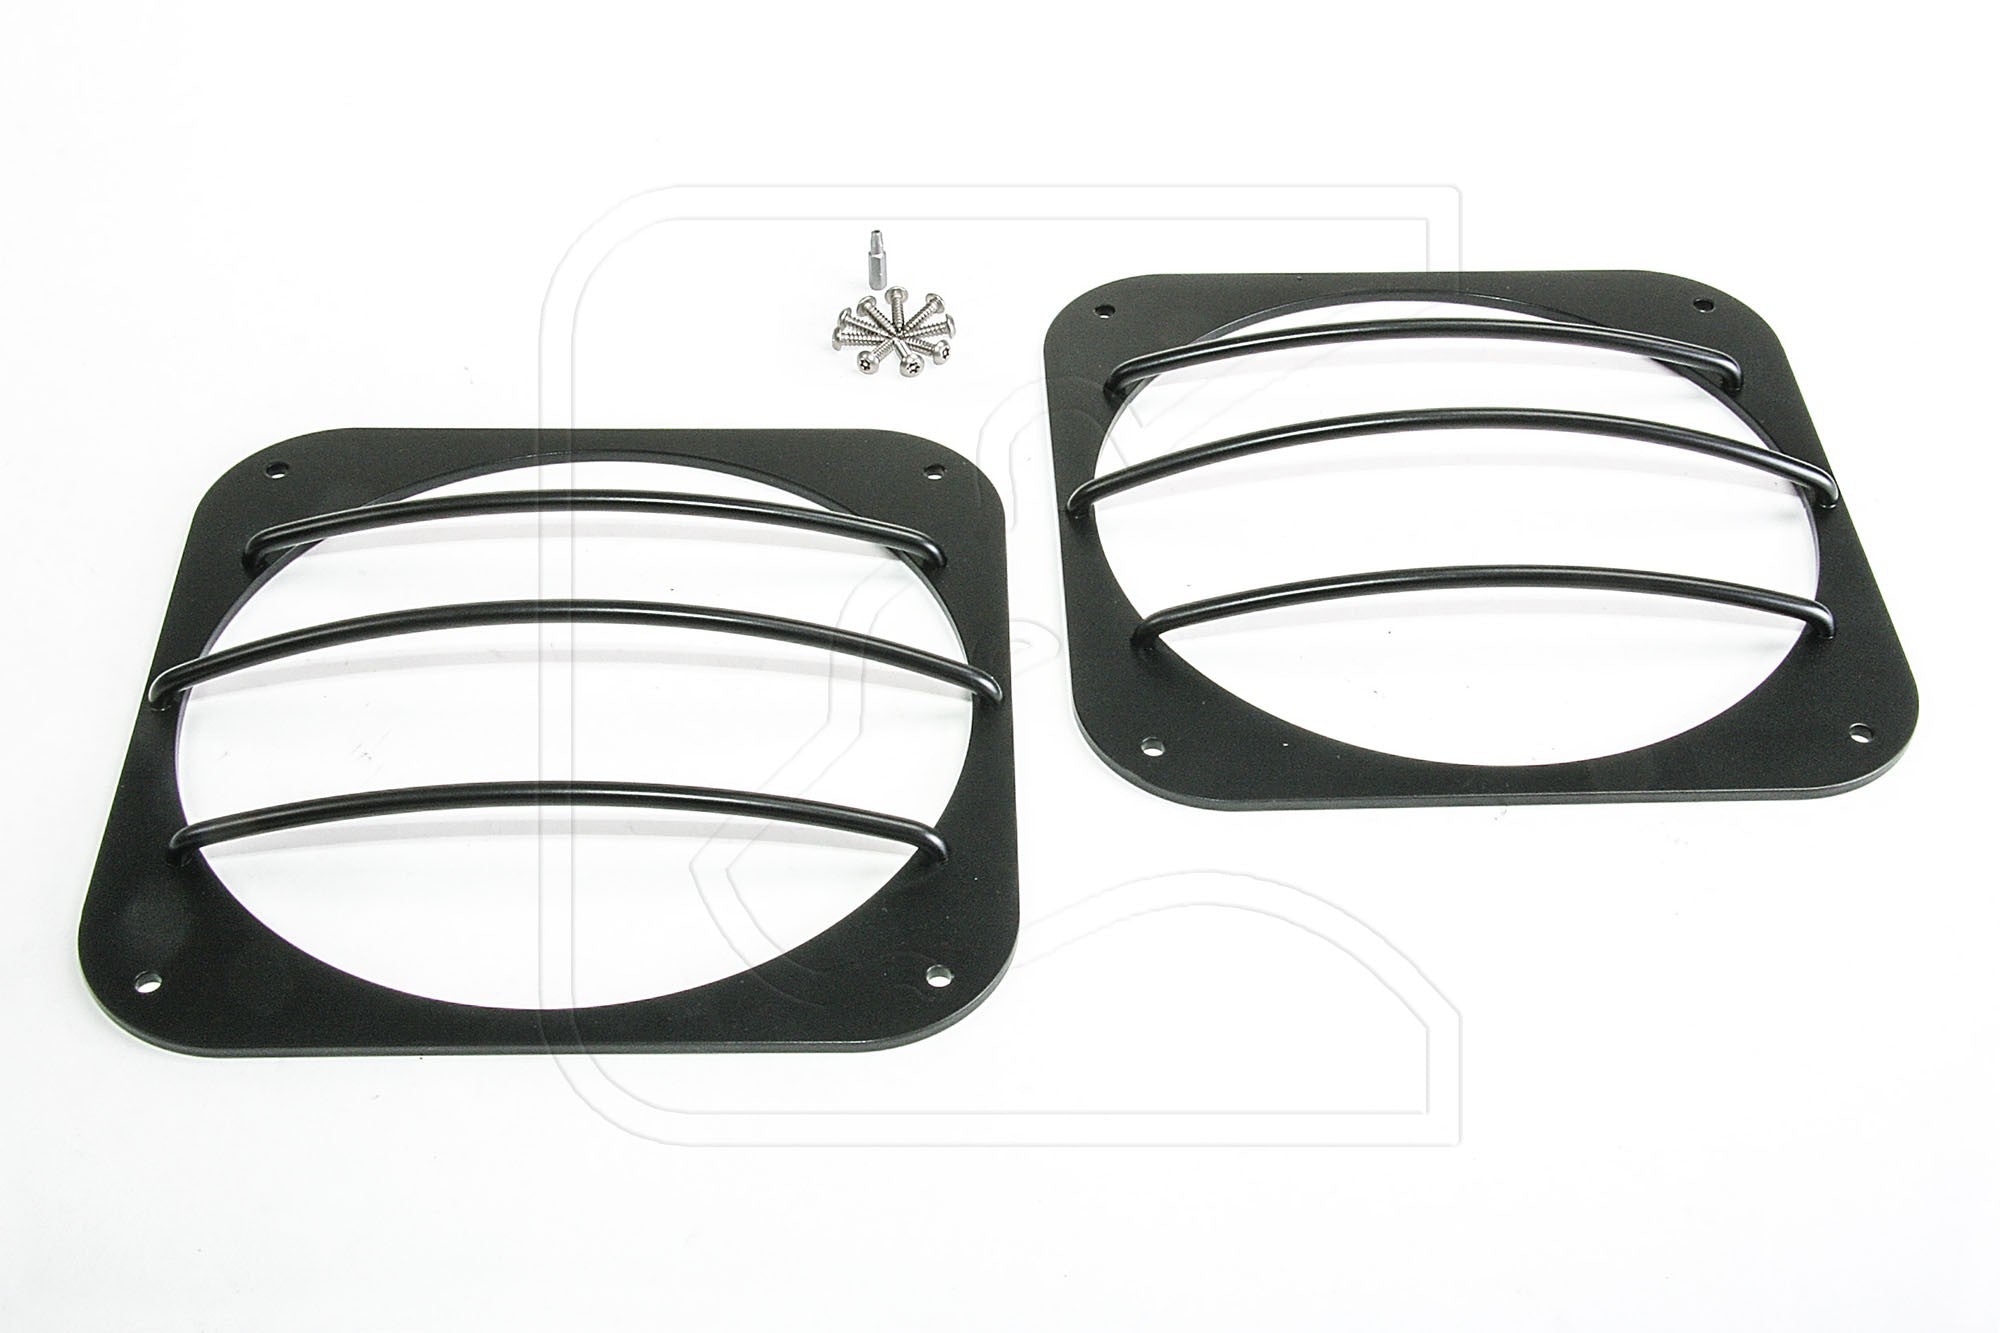 Headlight Protection Grilles - for Land Rover Defender or Series IIA/III (set of 2)